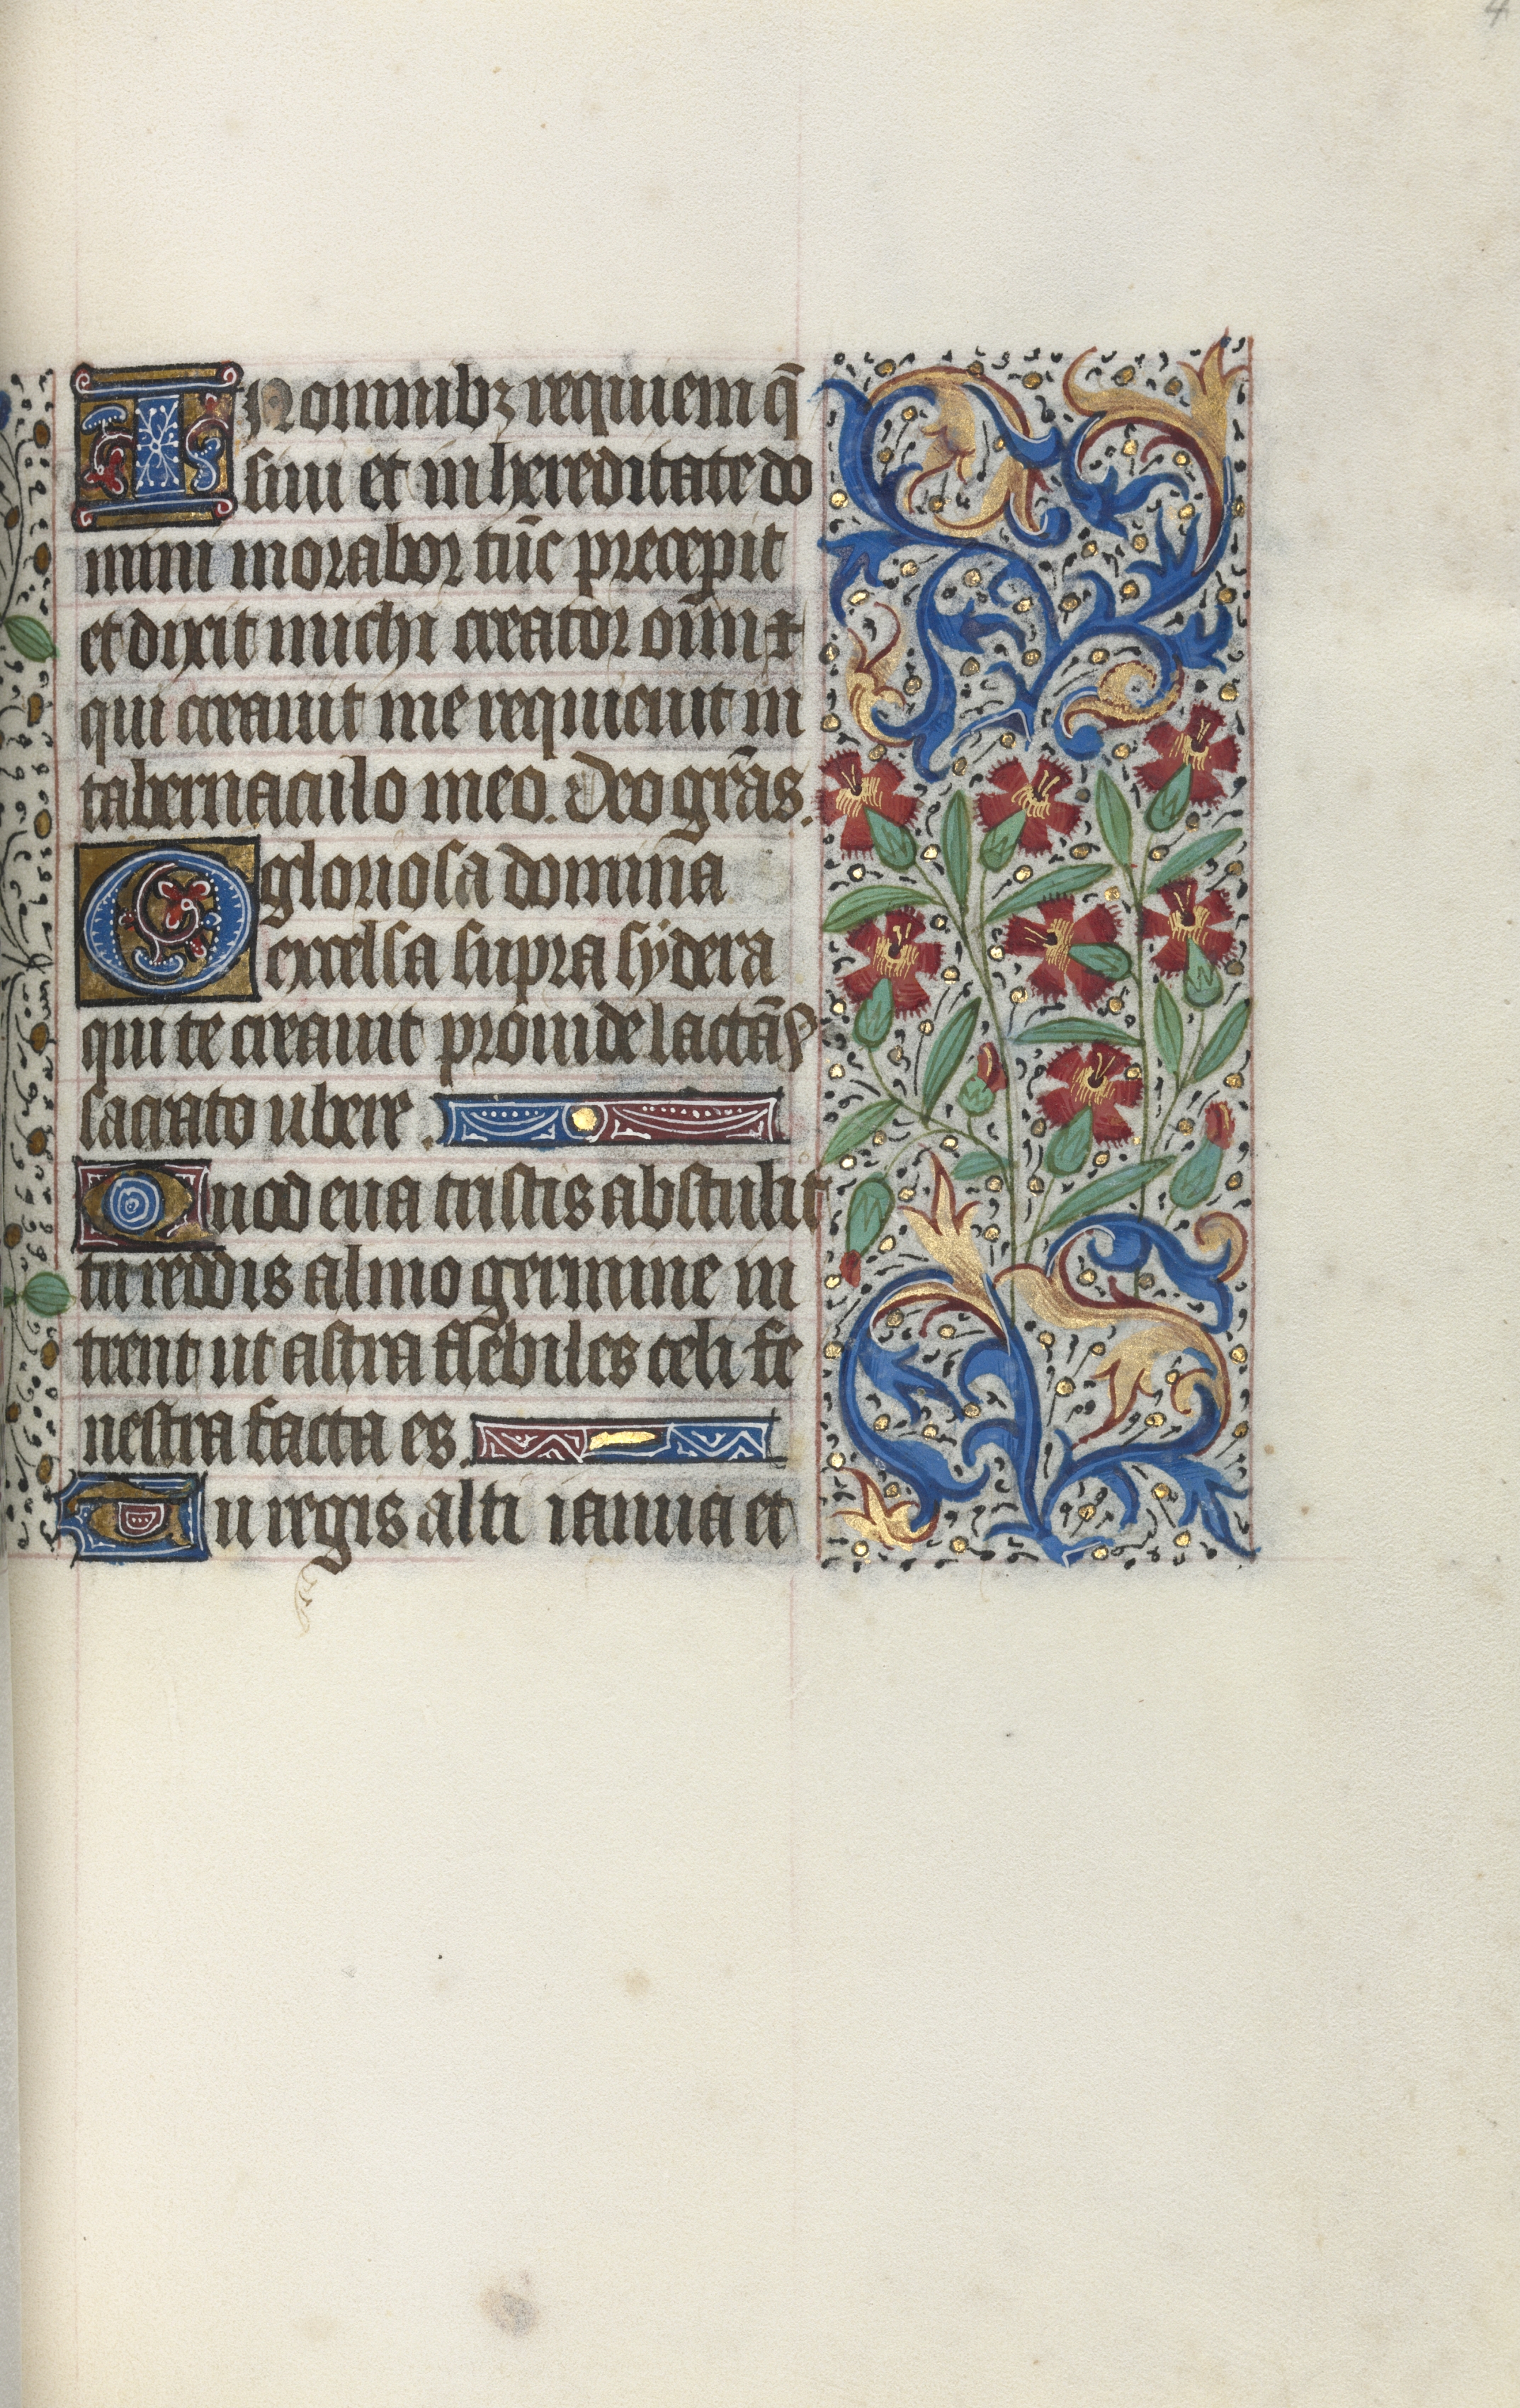 Book of Hours (Use of Rouen): fol. 47r